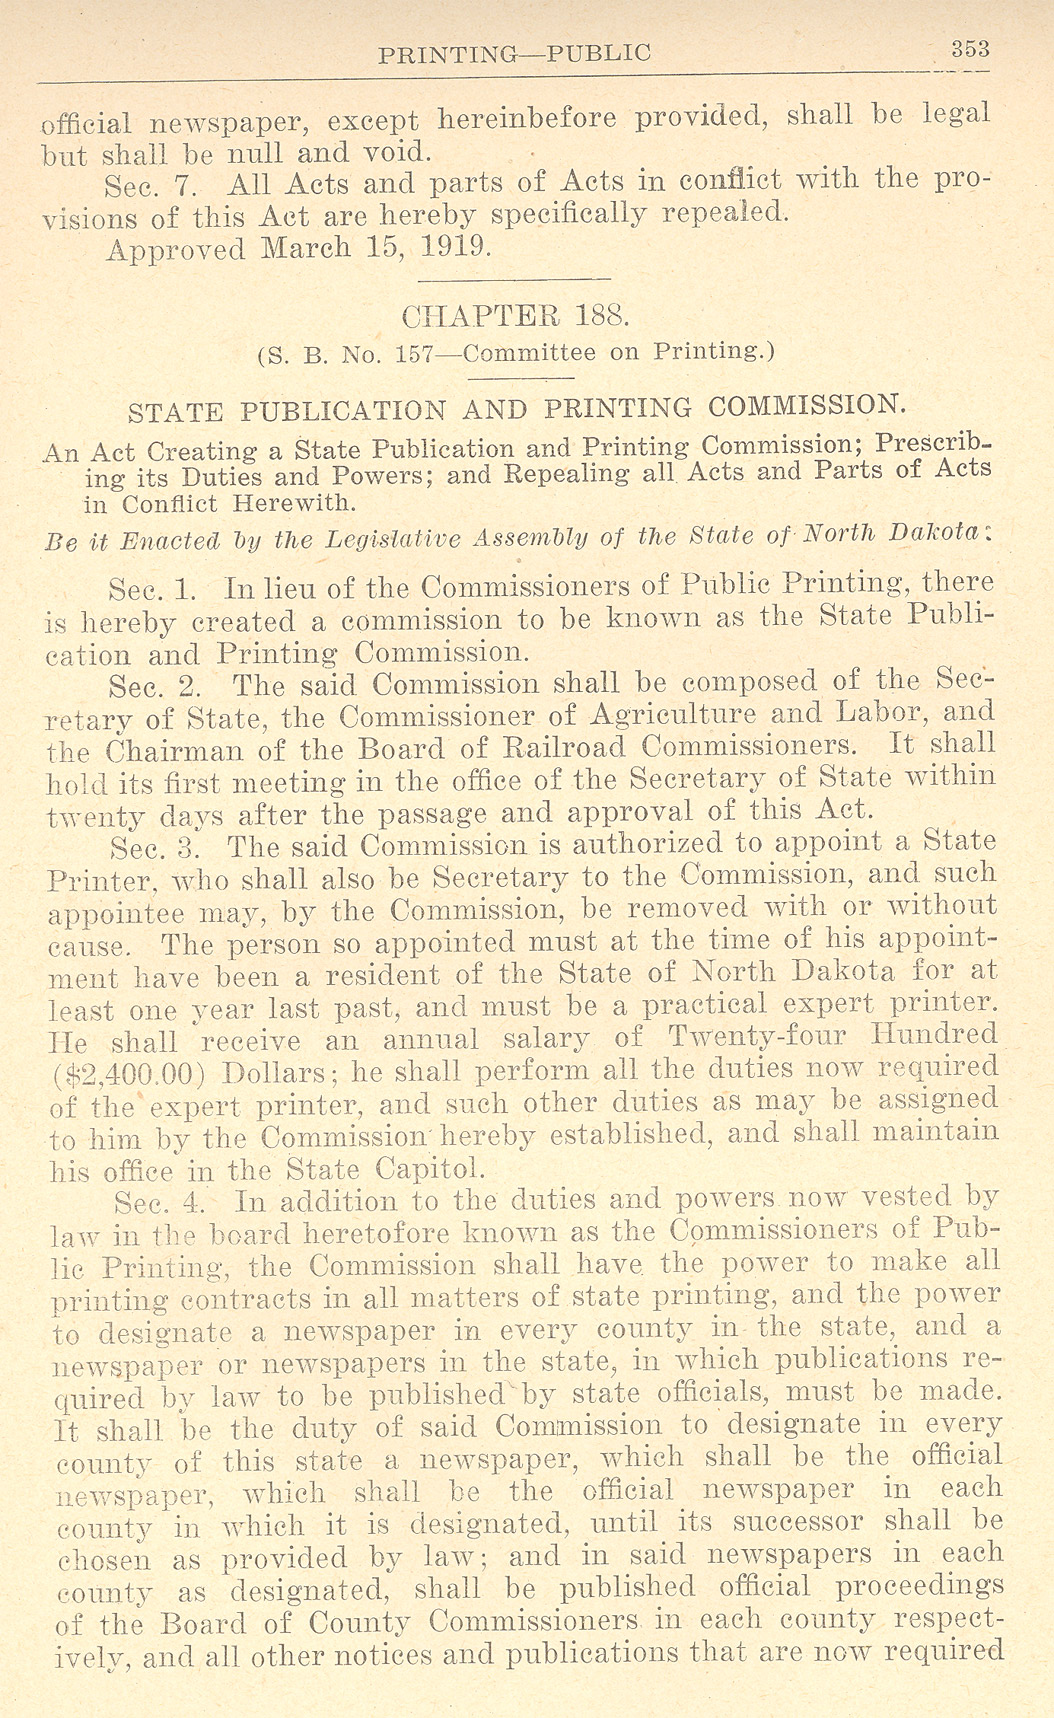 The 1919 legislature passed two laws regarding the state printing business. One allowed for voters to select the official county newspaper. This law would not be effective until the next election in 1920. The other law created the State Printing Commission which would select official county newspapers. More than 61 newspapers had gone out of business before voters had a chance to vote for a county newspaper. These images were scanned from the North Dakota Laws of 1919.